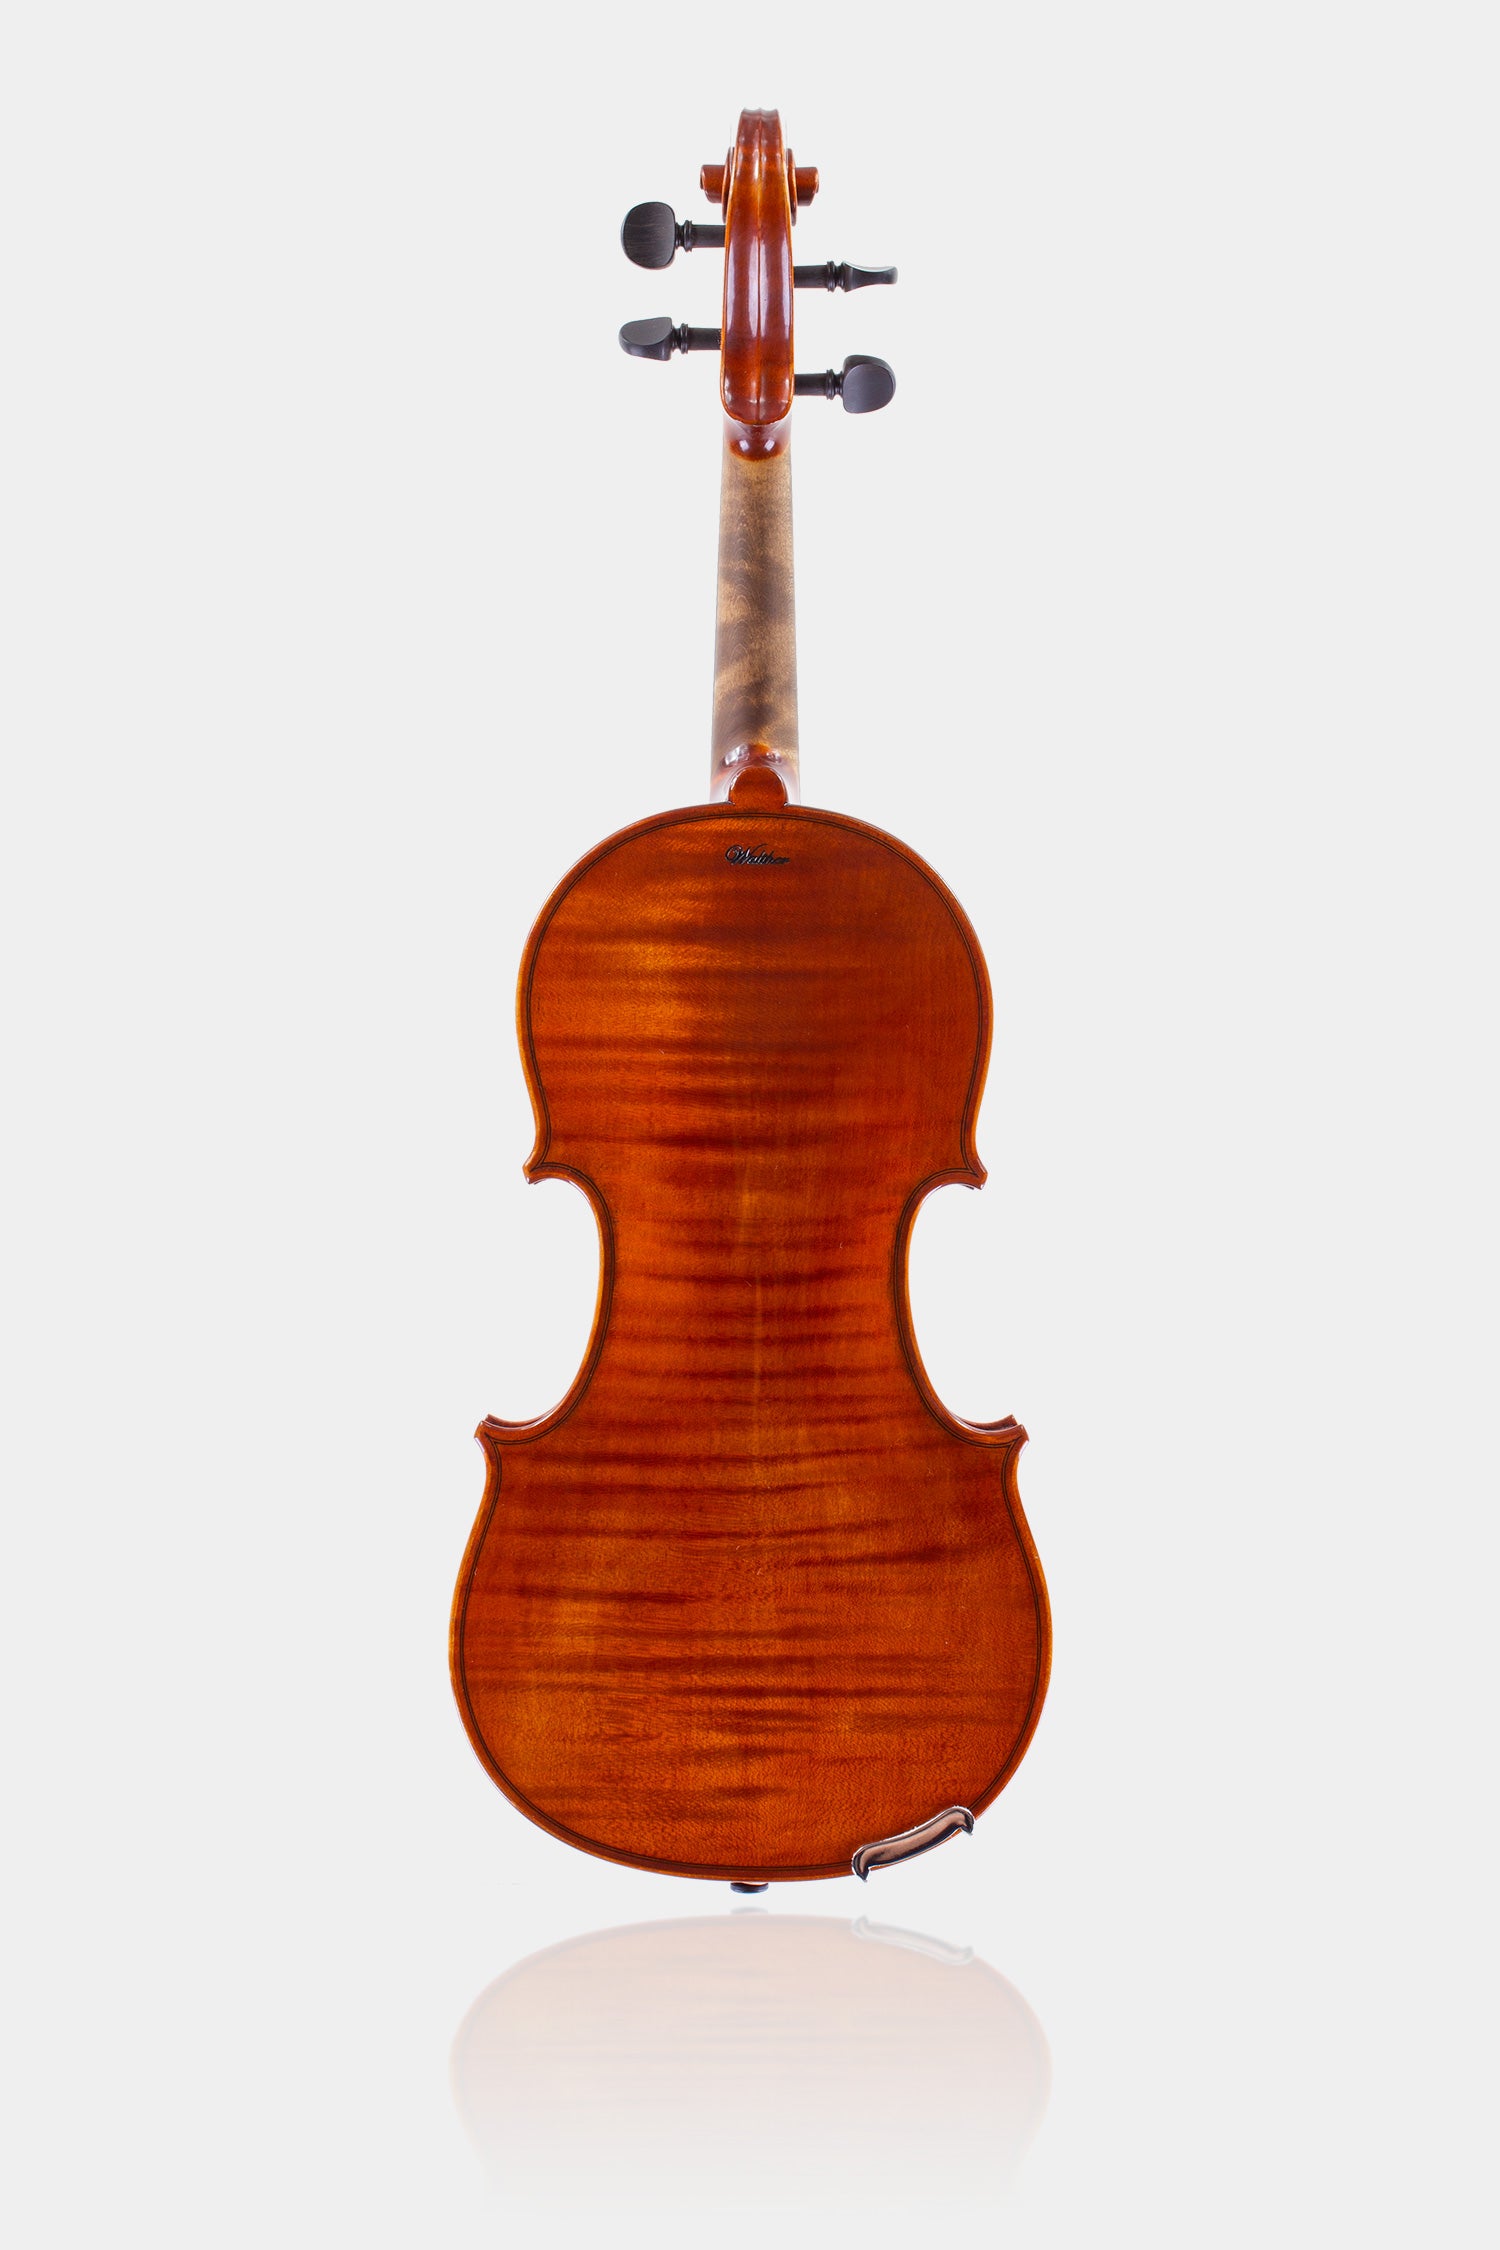 Georg Walther Concert Violin